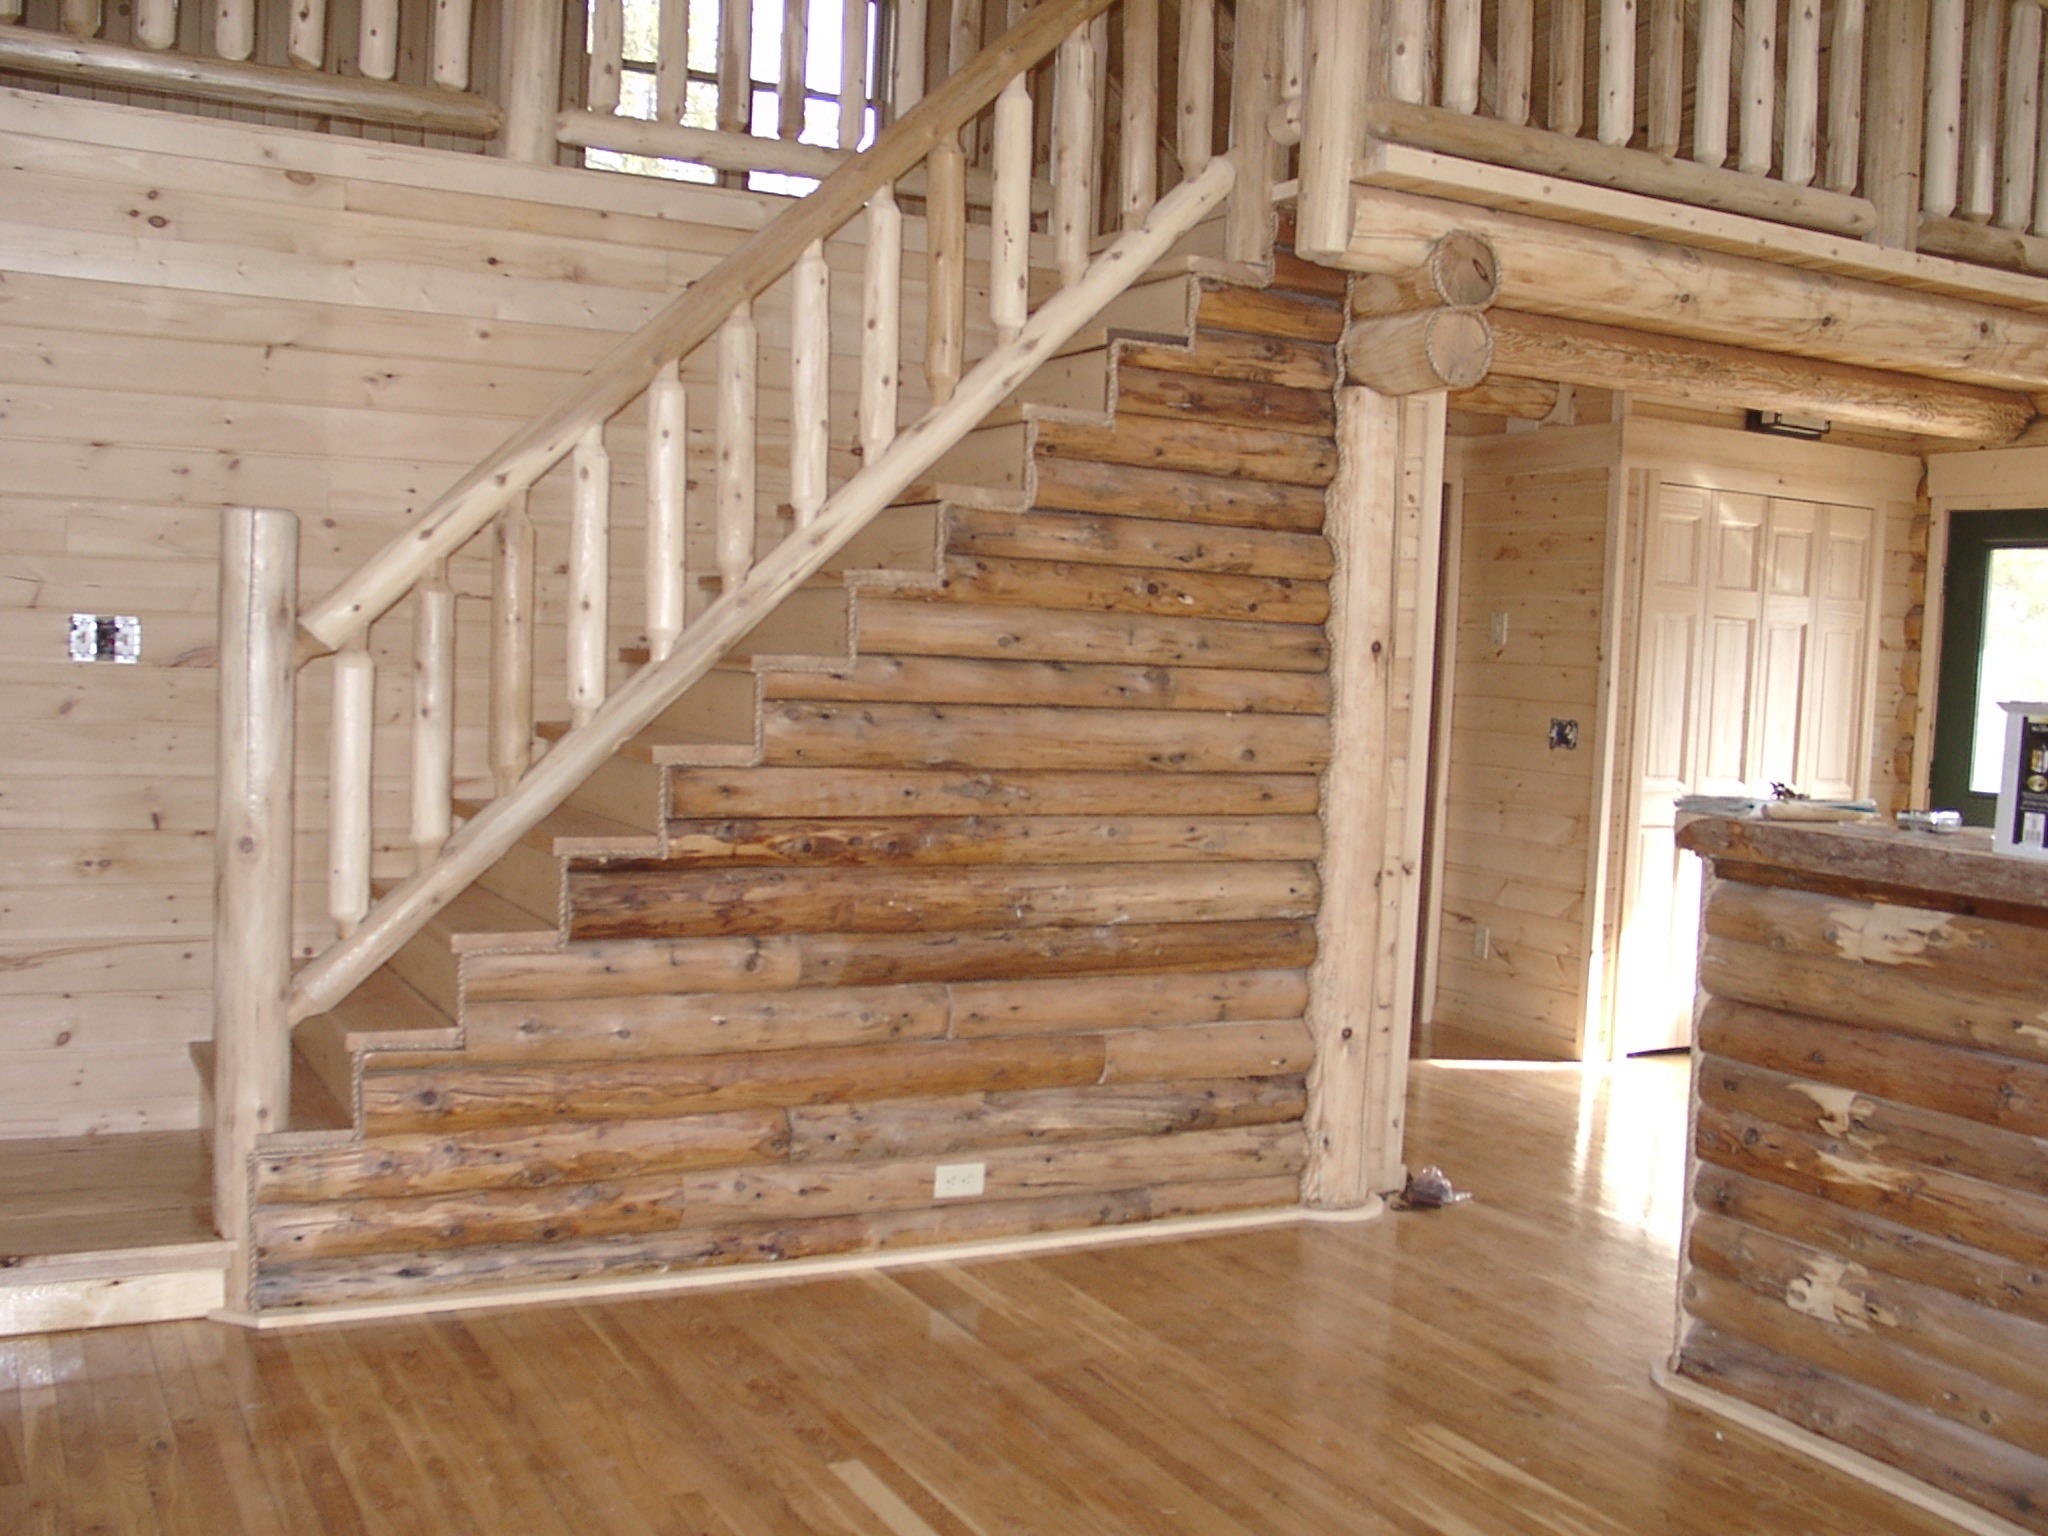 The interior of a log wood home